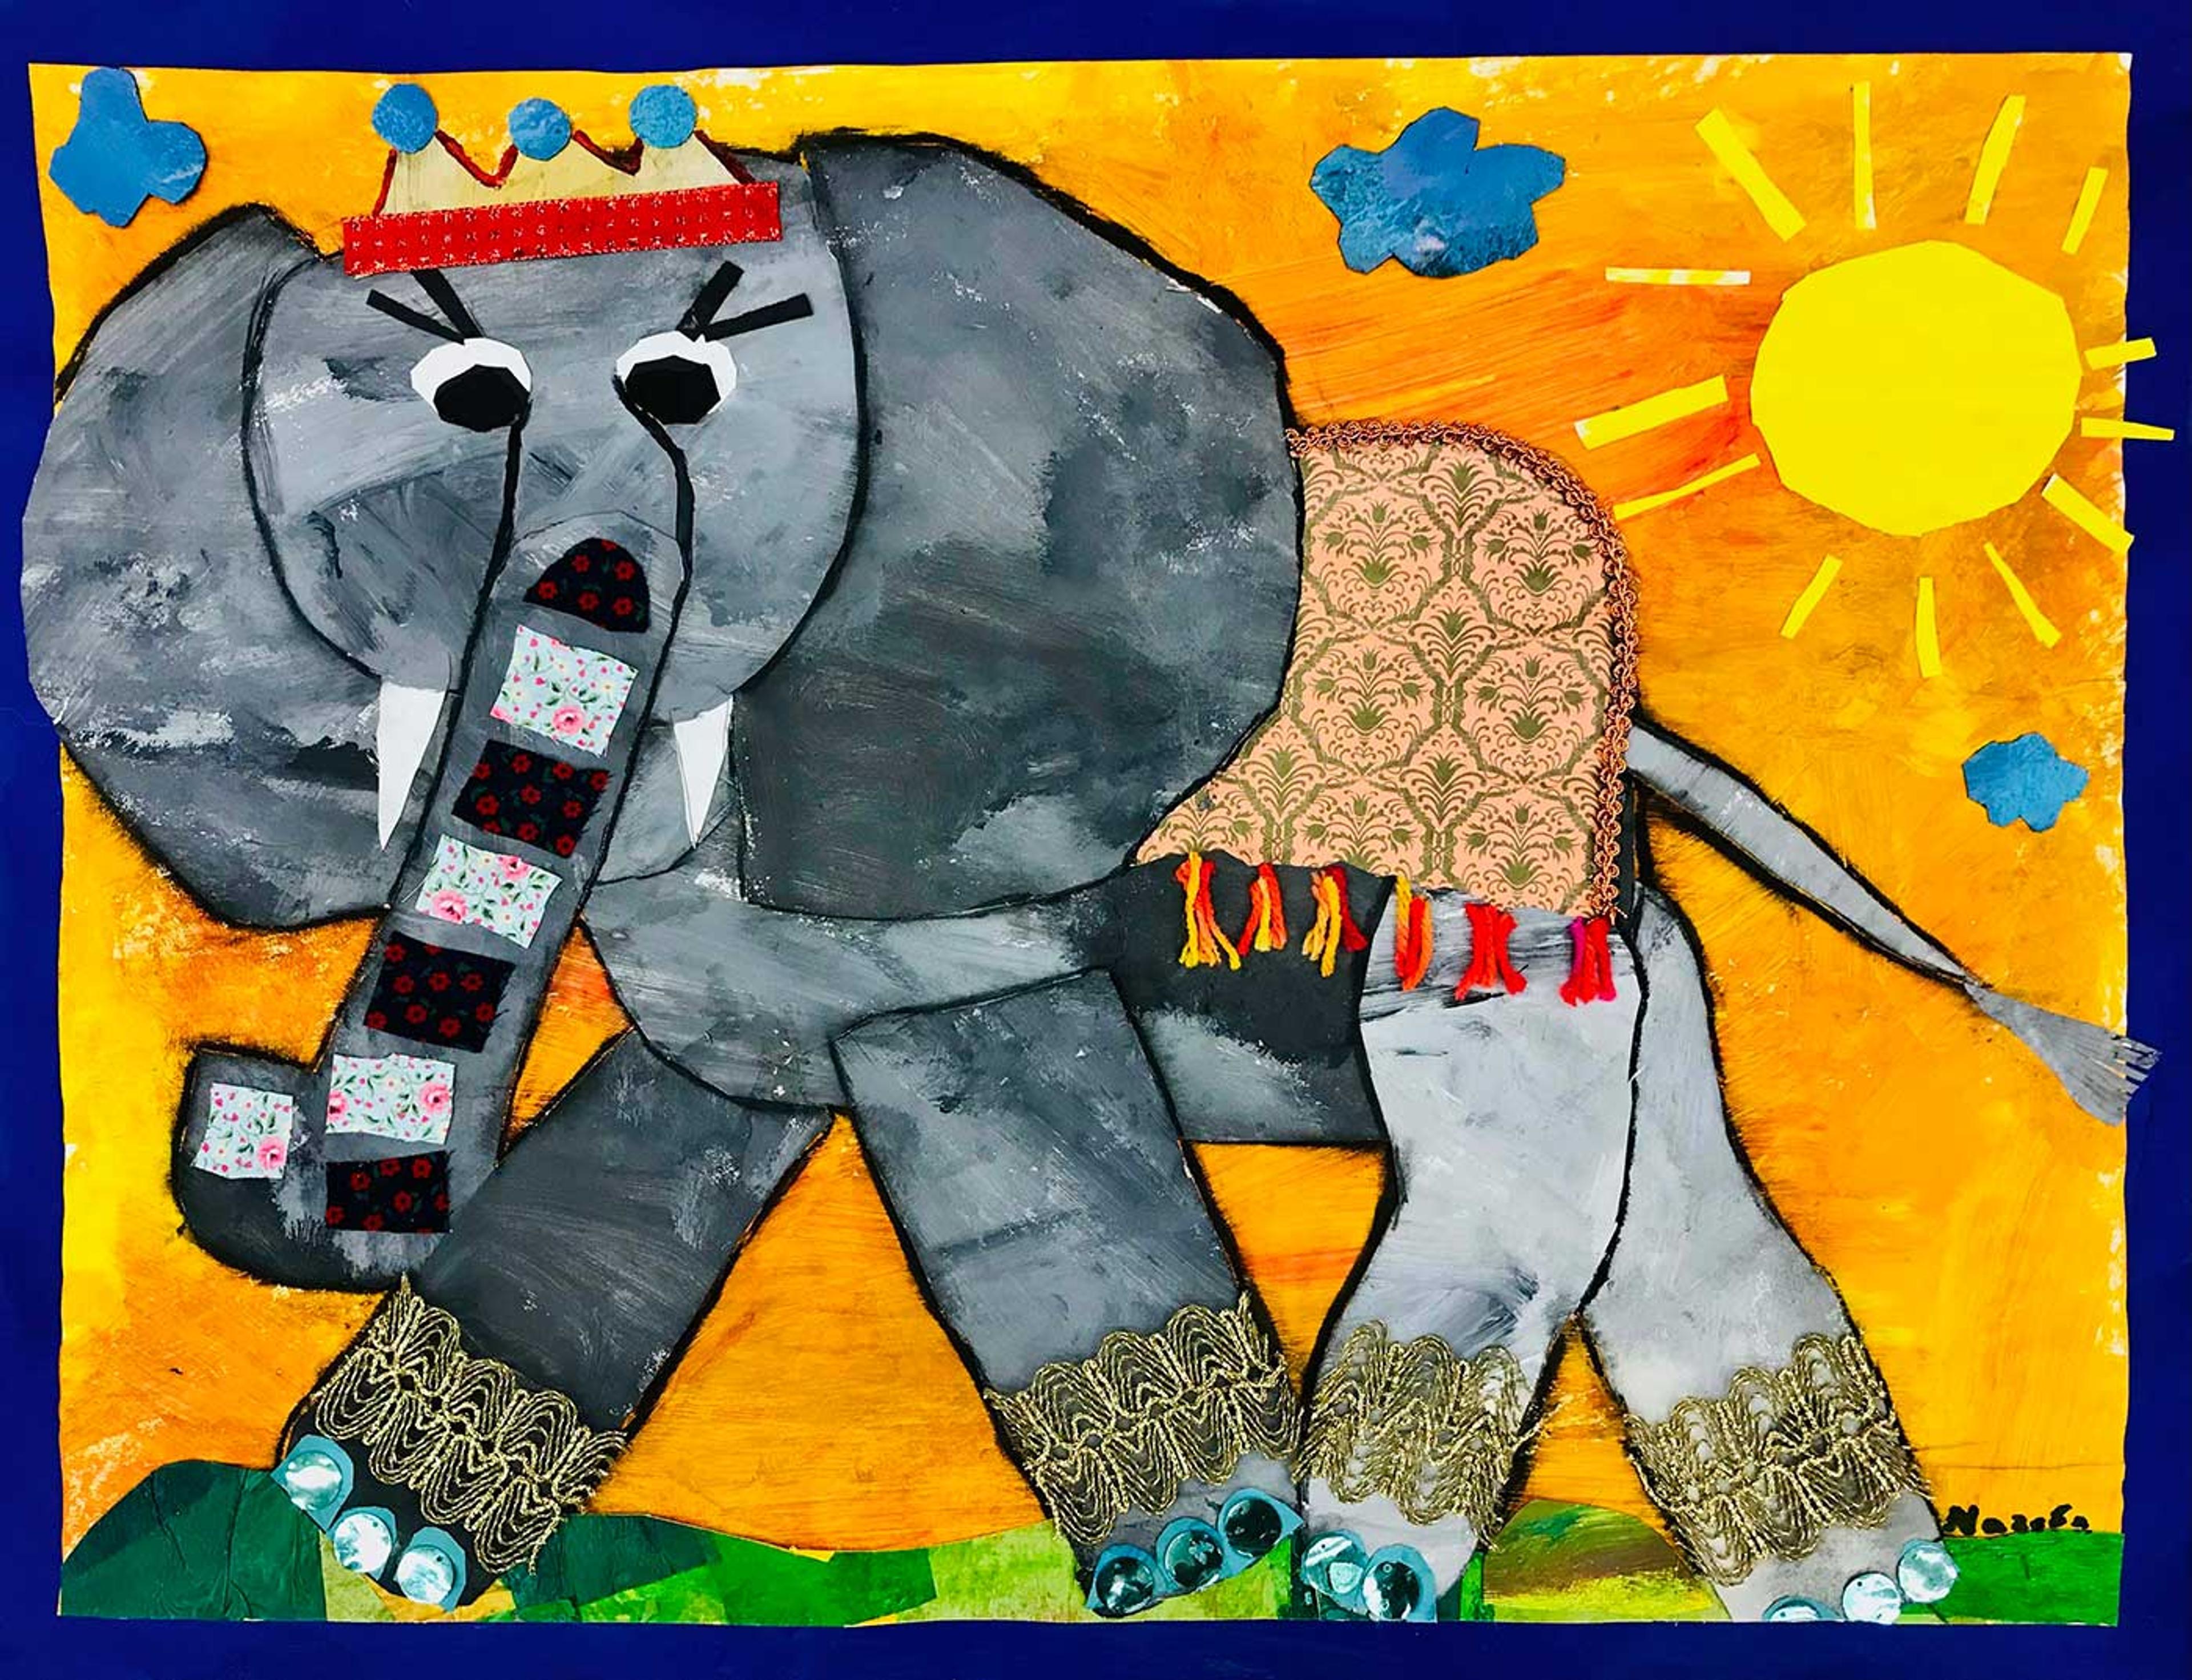 Collage of an elephant walking across a yellow background with a sun in the corner.